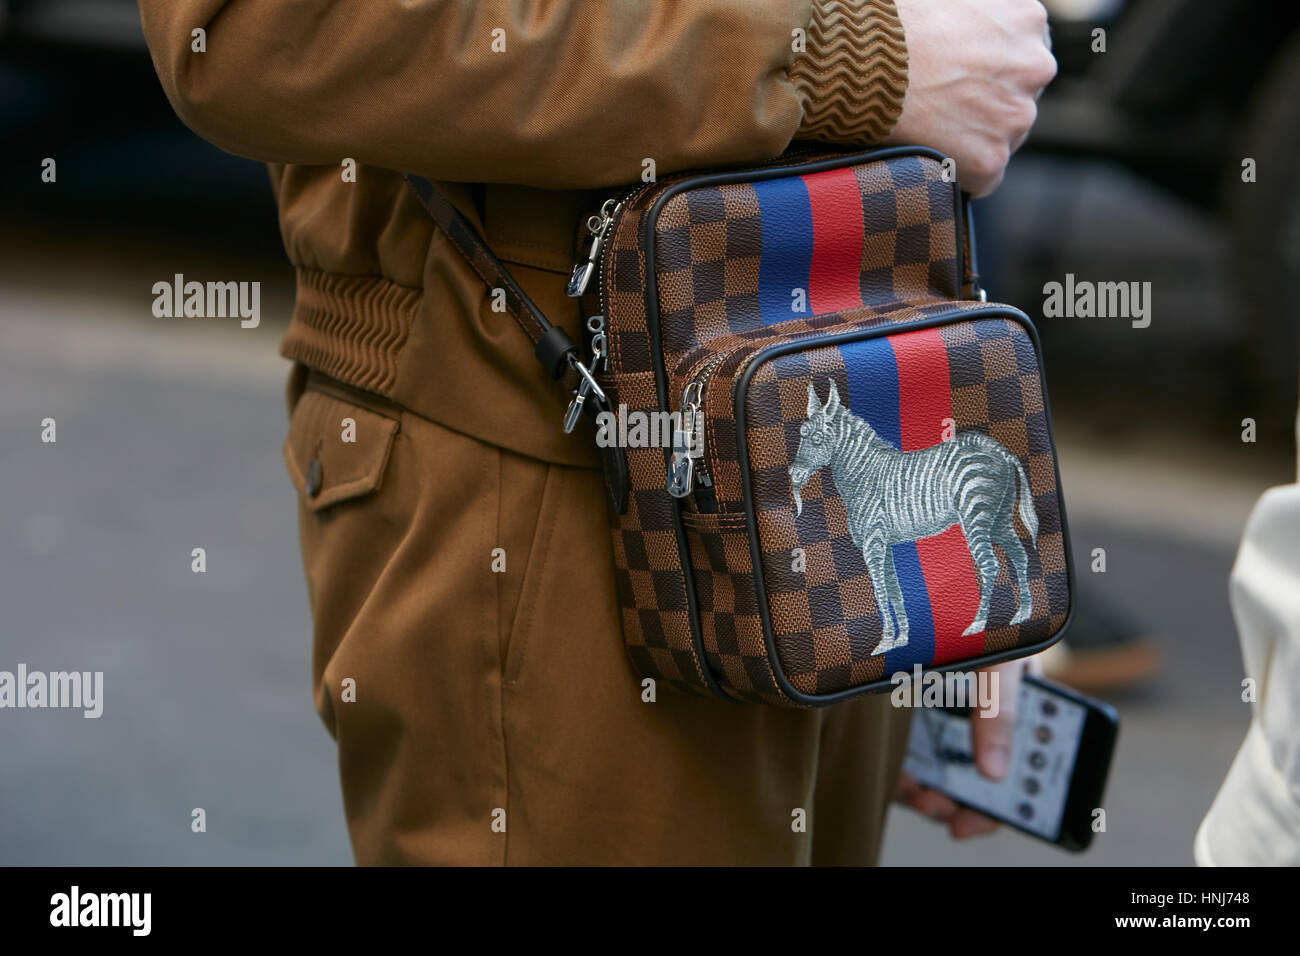 Man with Louis Vuitton small bag with zebra design before